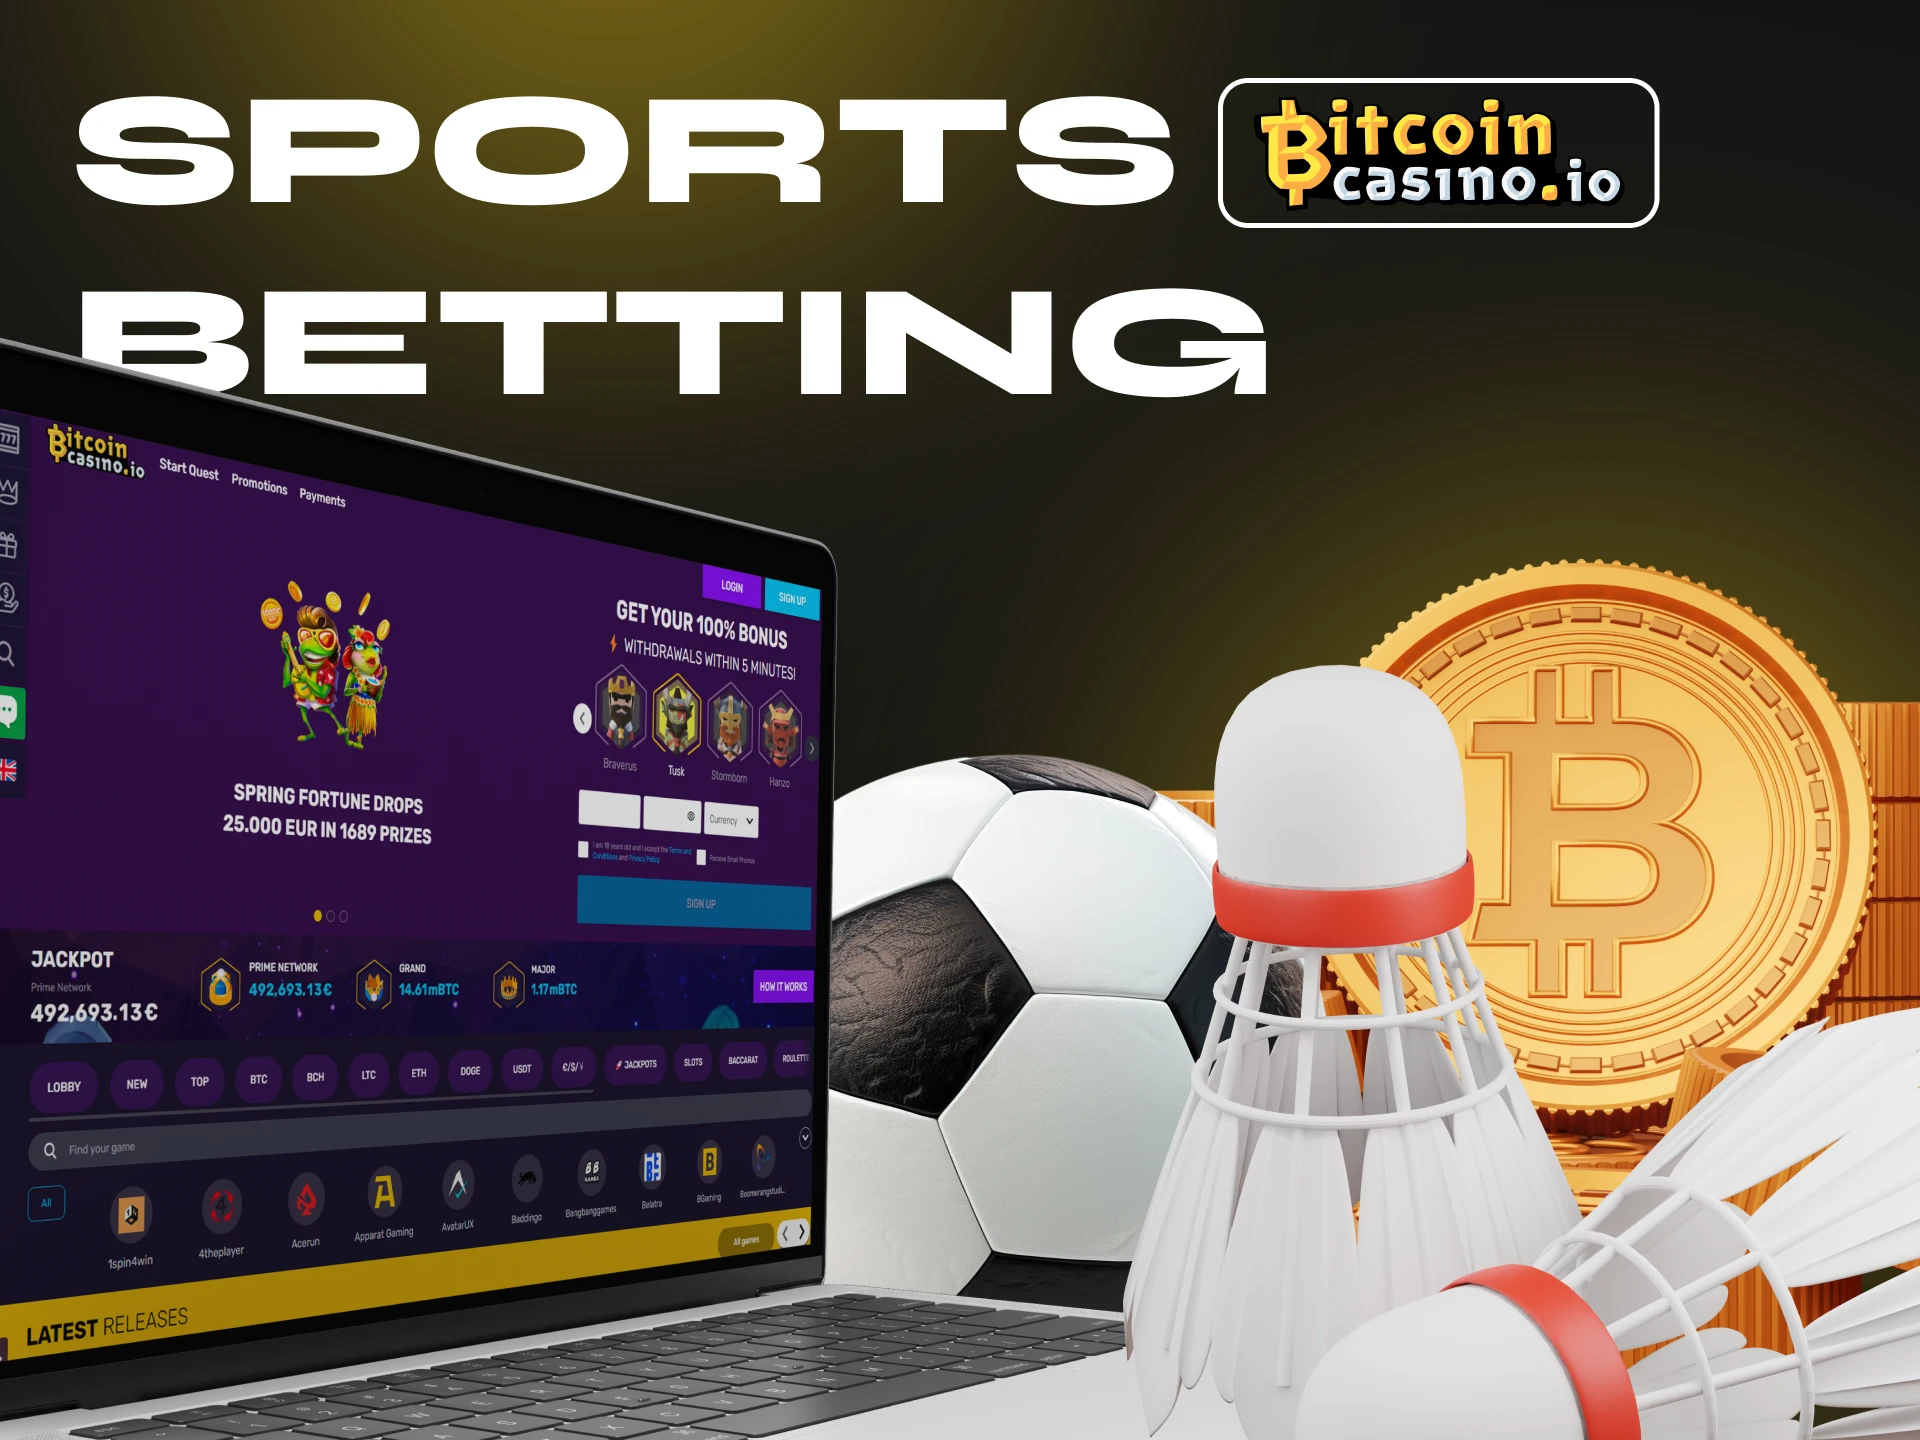 If you are looking for a crypto casino where you can bet on sports, Bitcoincasino is not for you.